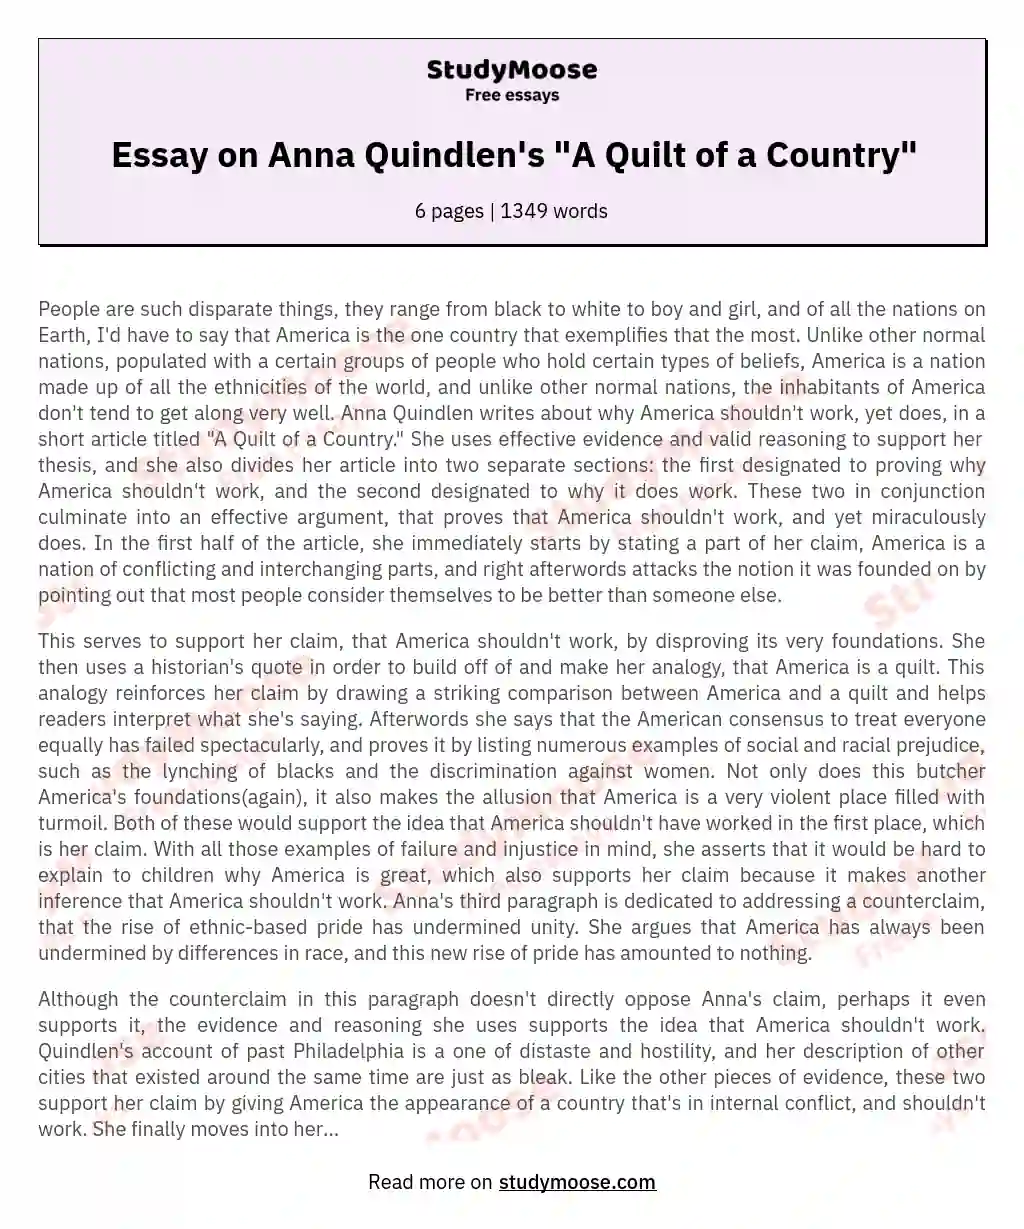 Essay on Anna Quindlen's "A Quilt of a Country" essay